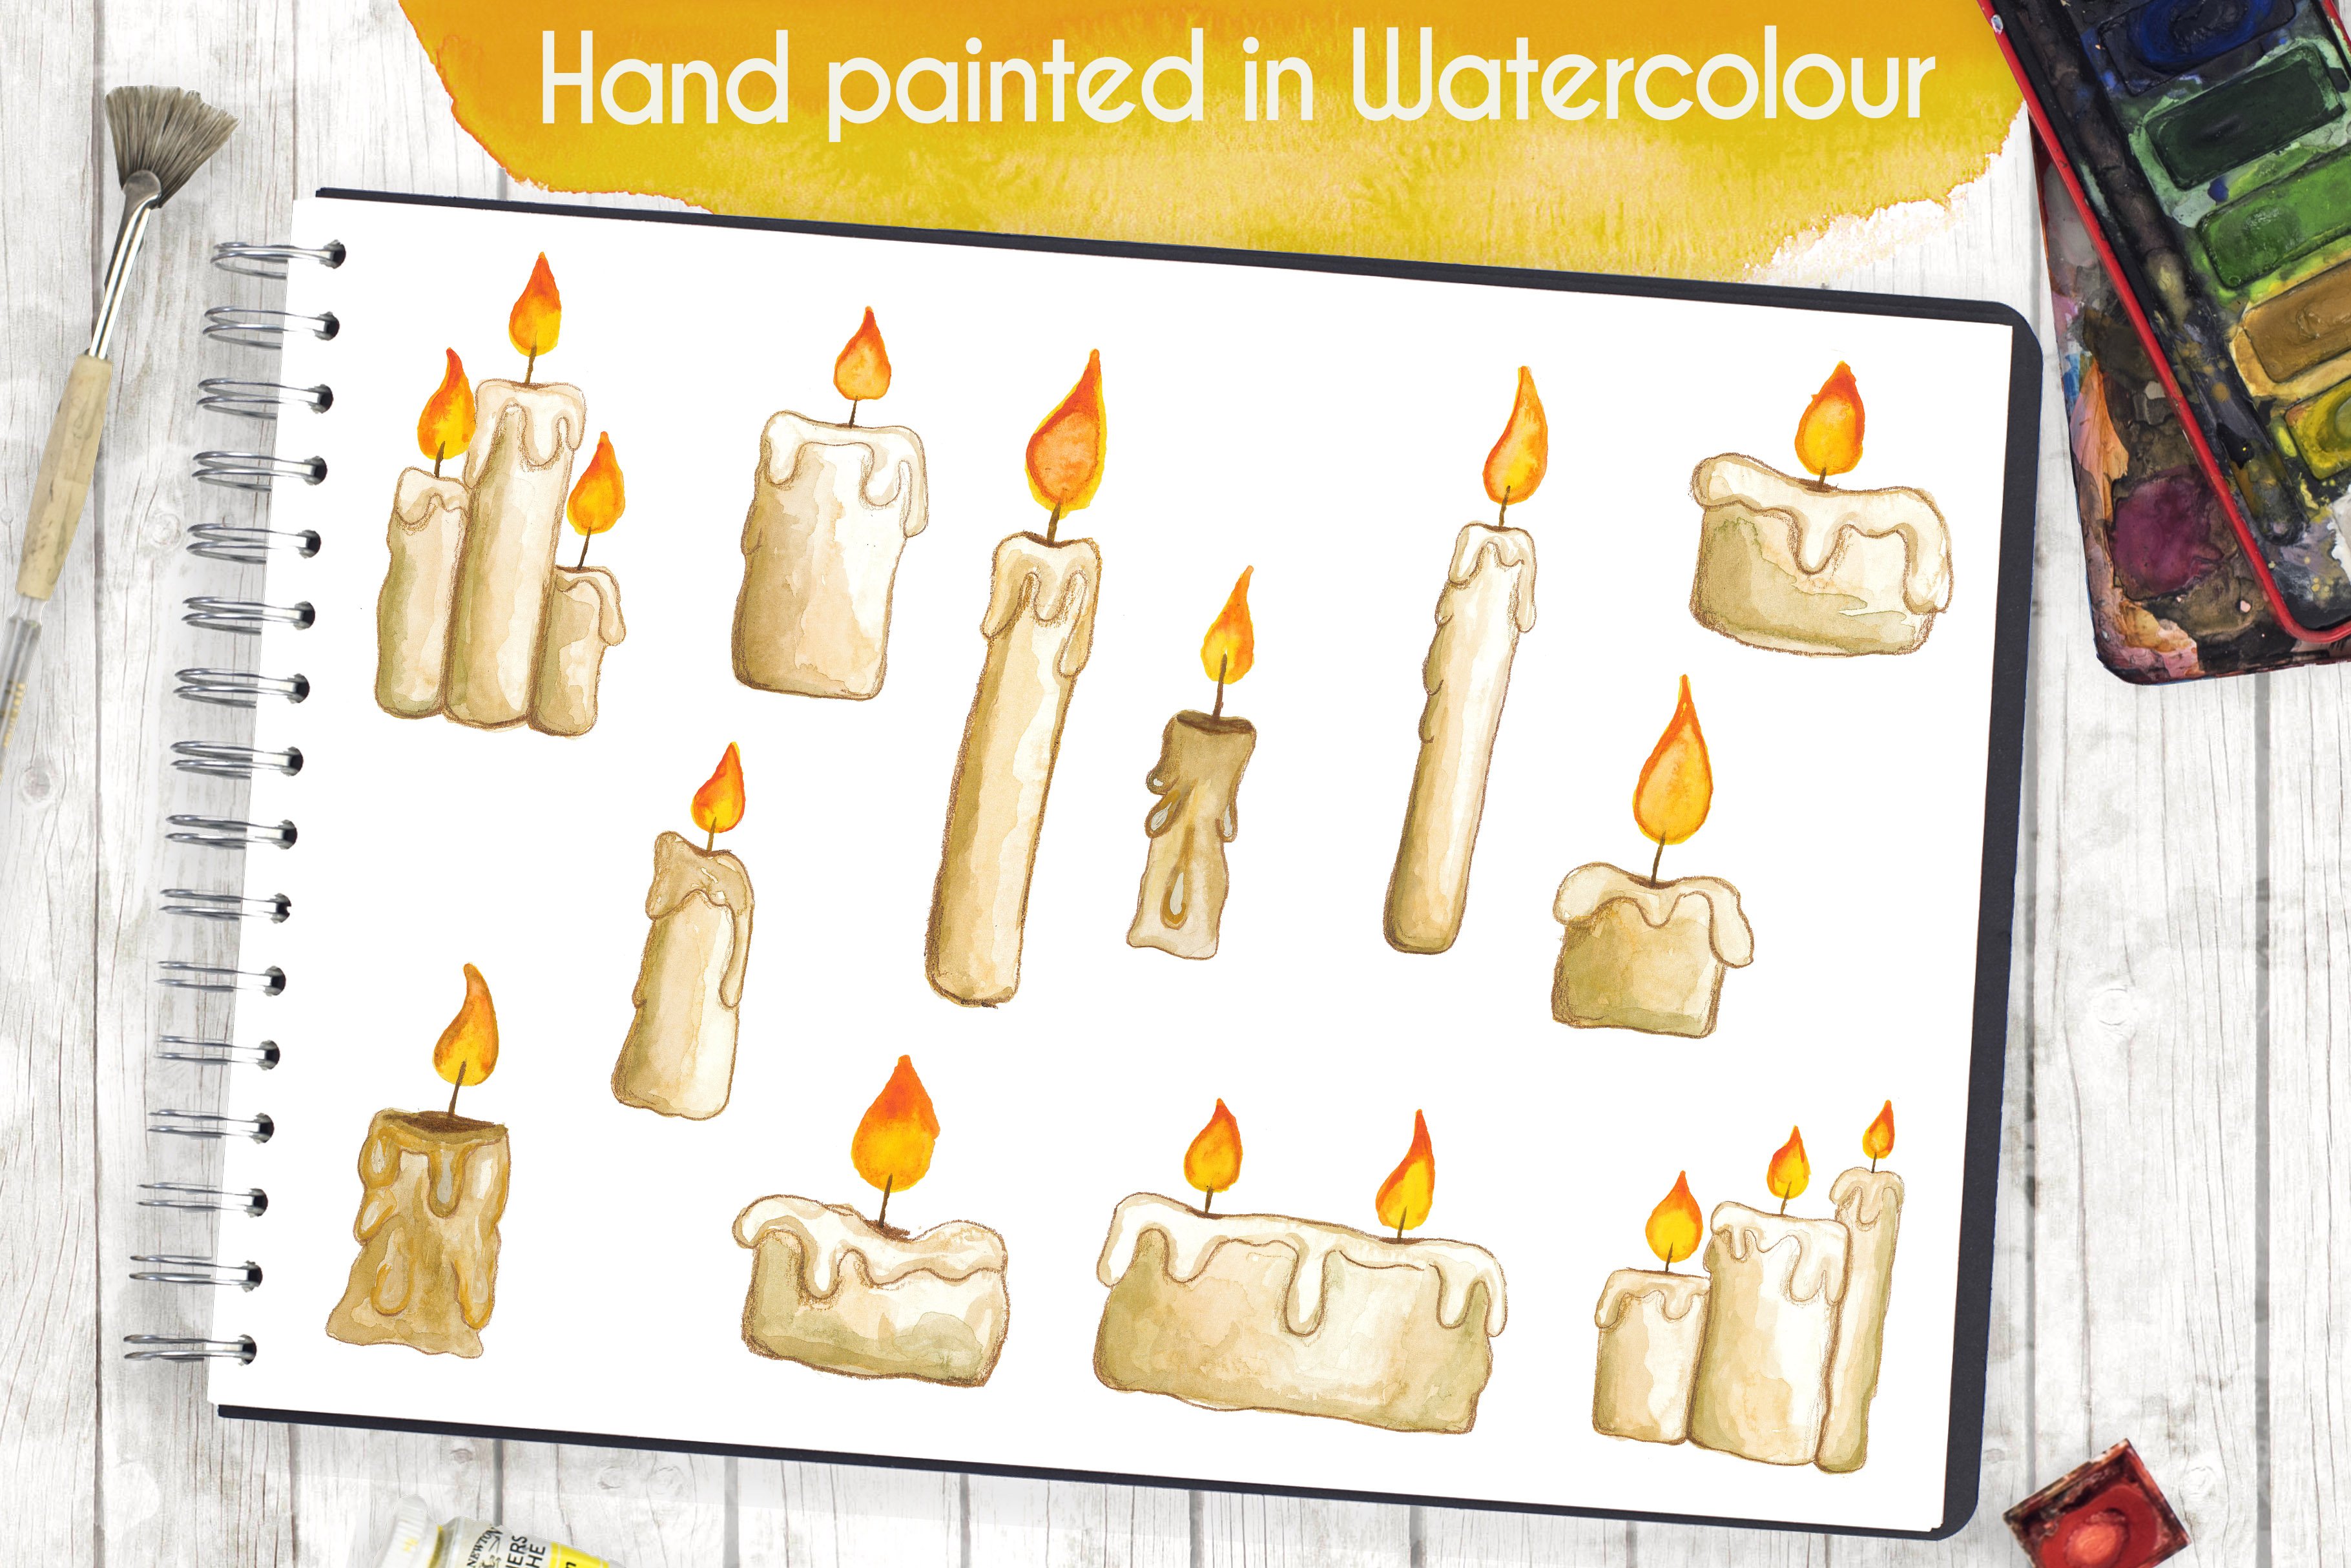 Watercolour Candles preview image.